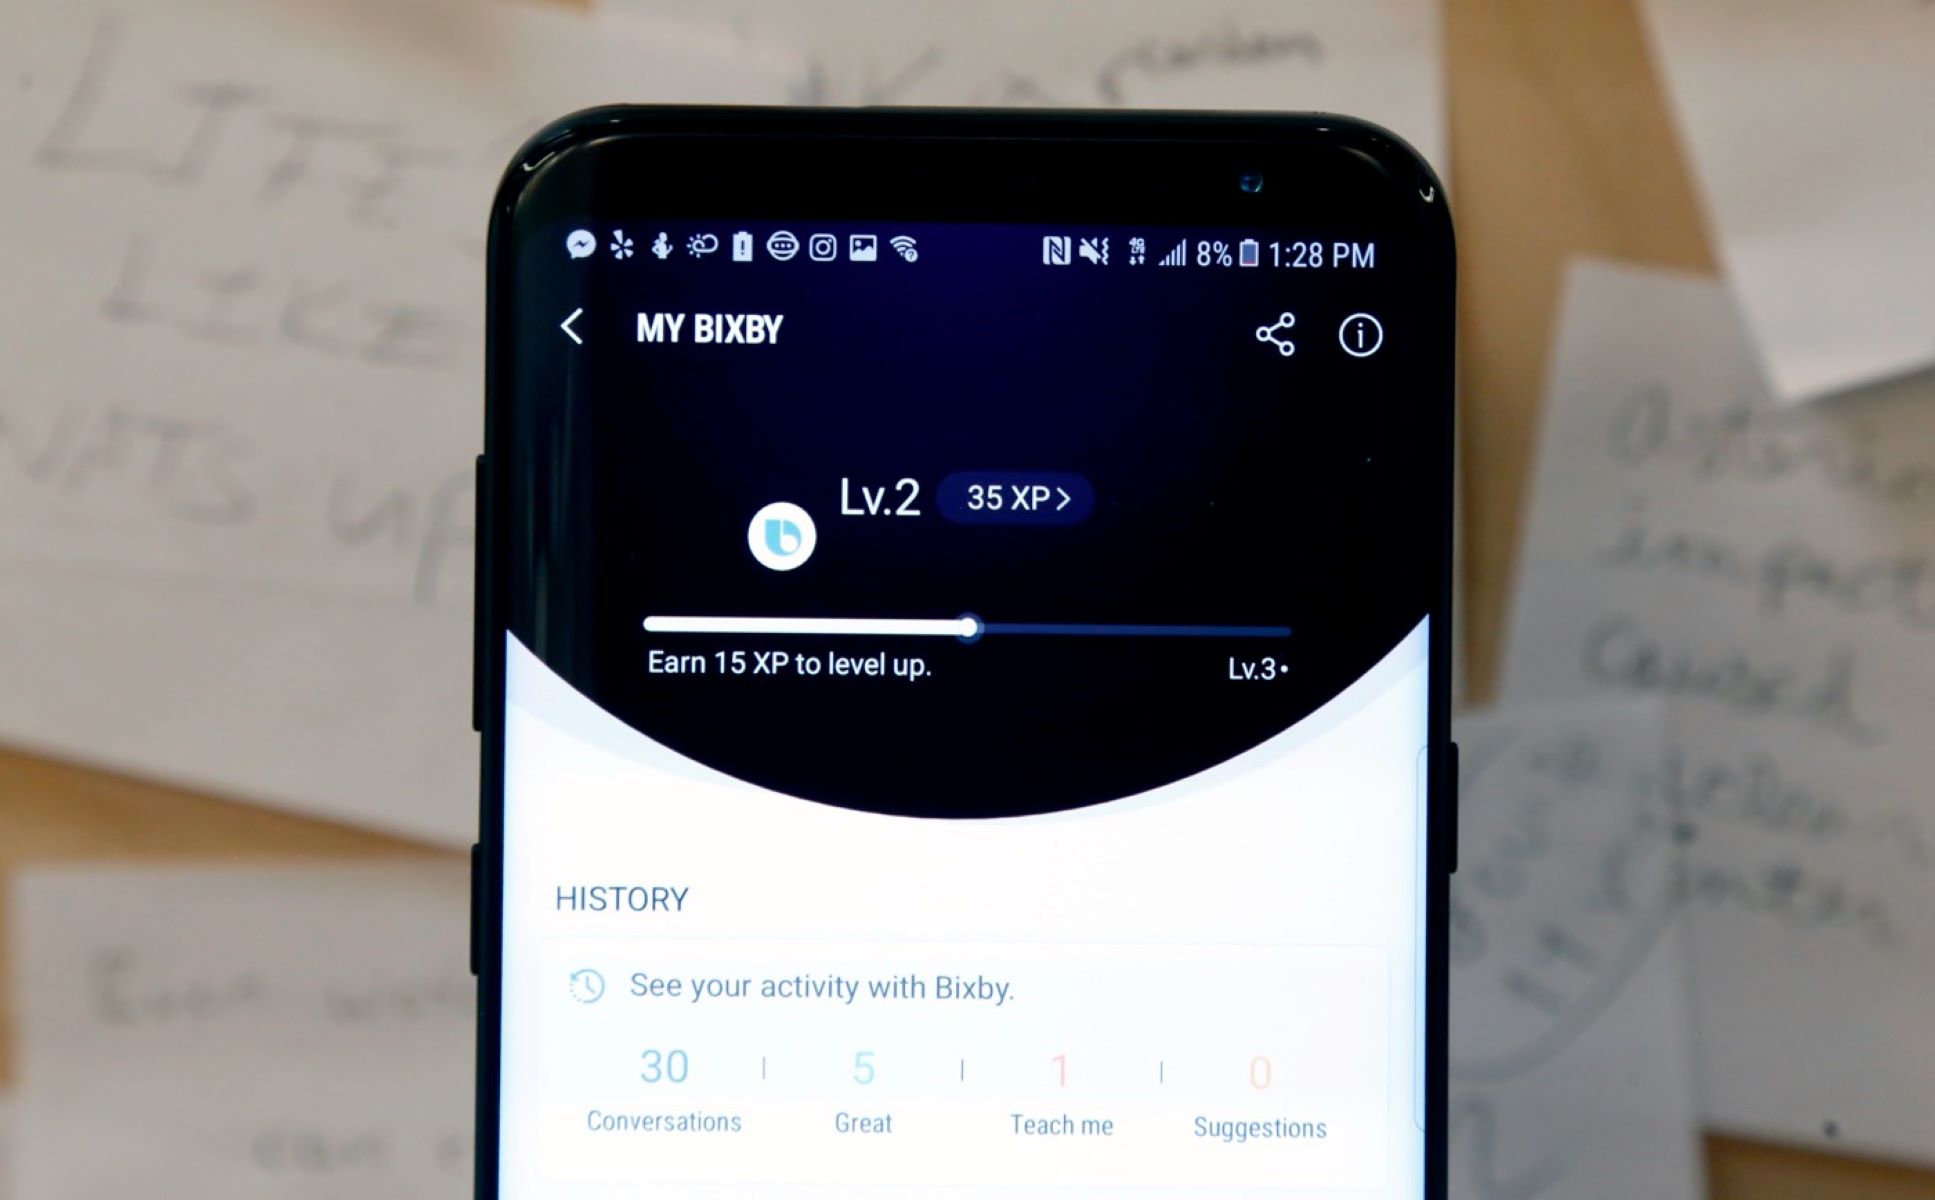 How To Level Up Bixby